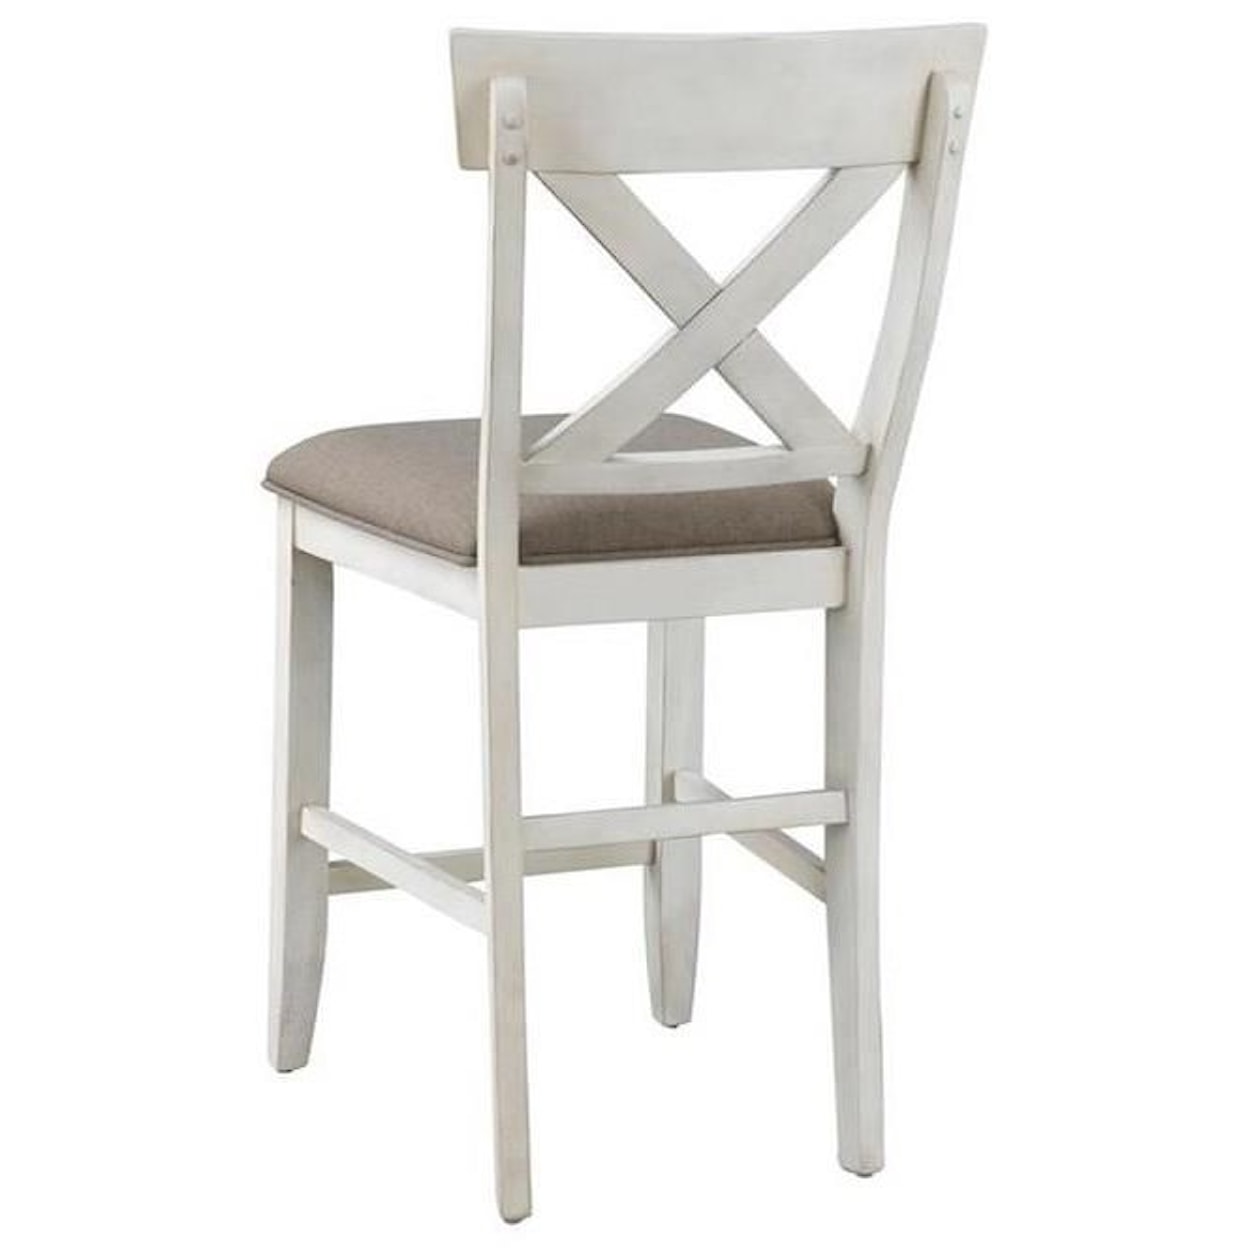 Carolina Accent Bar Harbor II Counter-Height Dining Chair